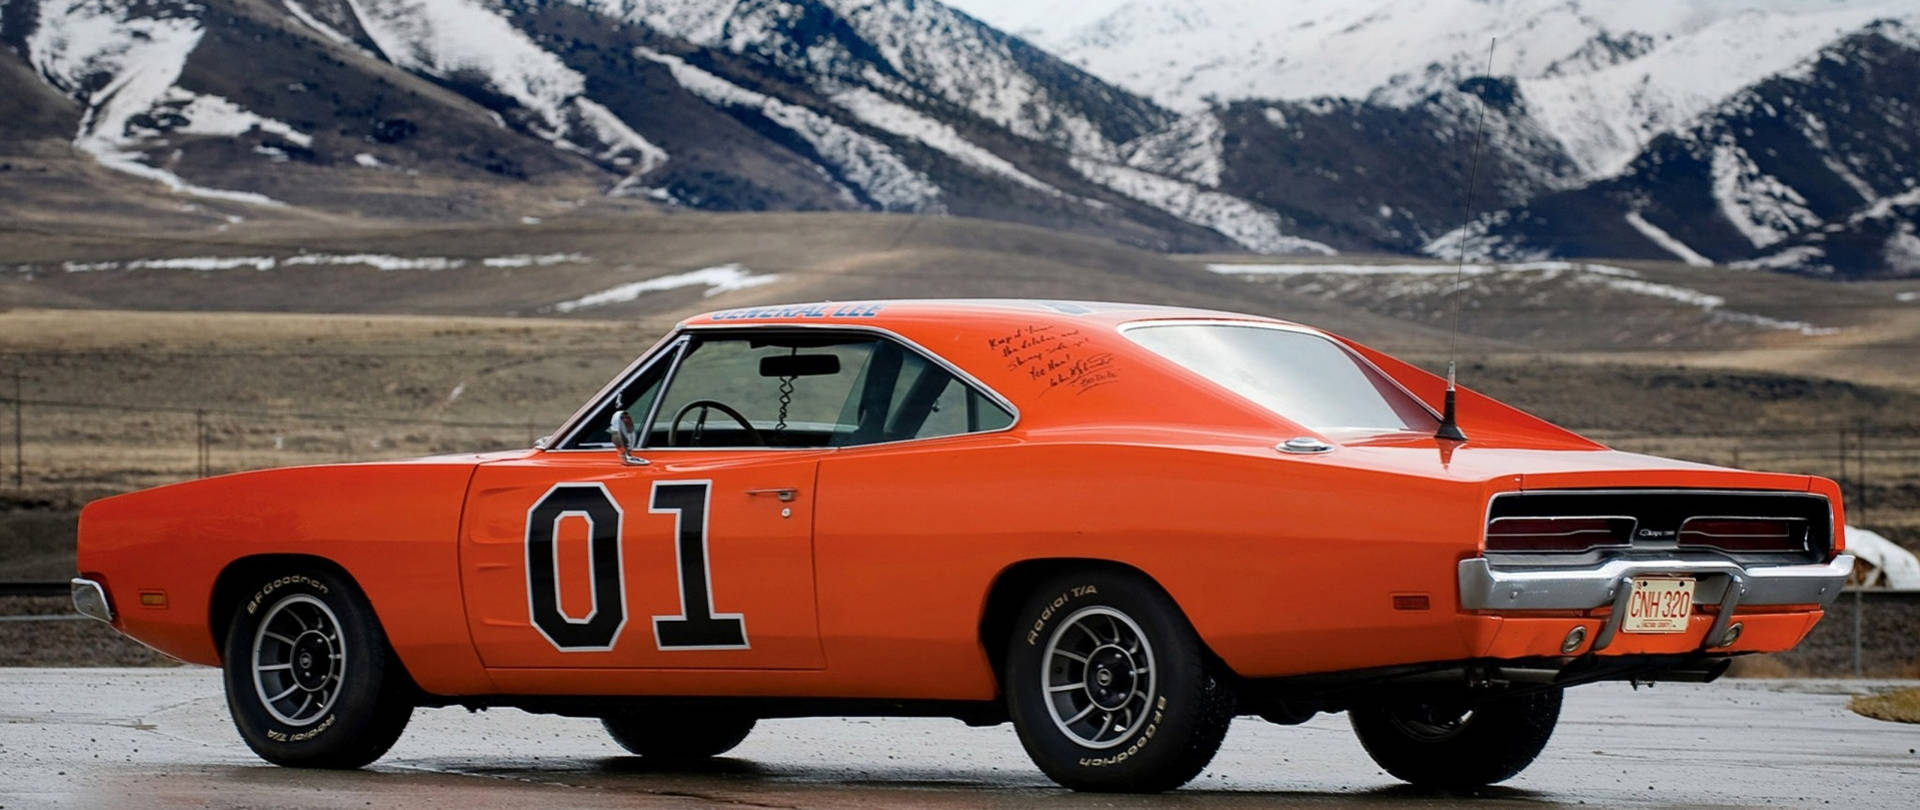 An Orange Dodge Charger Is Parked In Front Of Mountains Wallpaper